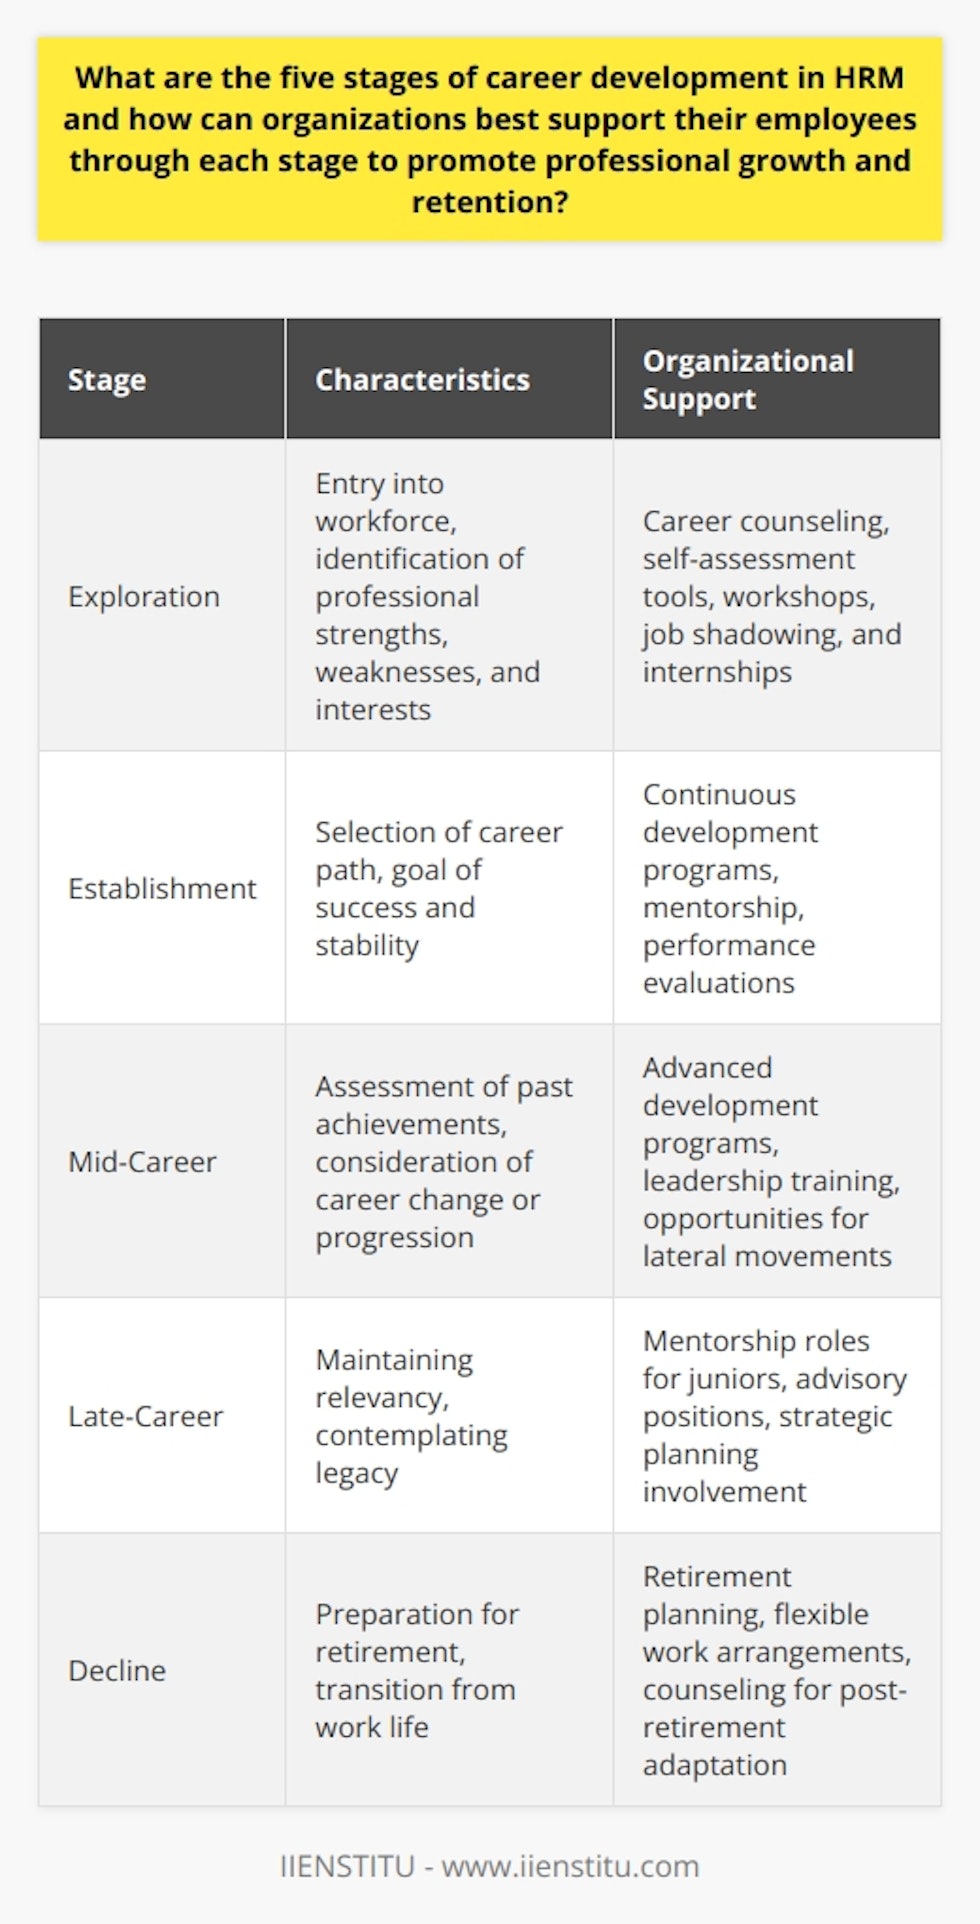 Career development within Human Resource Management (HRM) is a critical process that unfolds through five recognized stages: the exploration stage, the establishment stage, the mid-career stage, the late-career stage, and the decline stage. Each offers unique challenges and opportunities for both the employee and the organization. Below are insights into each stage and how organizations can support their talent through these periods to foster professional growth and bolster retention.Exploration Stage:During this initial stage, individuals enter the workforce and begin to develop an understanding of their strengths, weaknesses, and professional interests. In this period of trial and error, HRM can support employees by offering career counseling, self-assessment tools, and workshops that reveal different career paths. Encouraging job shadowing and internships, particularly through initiatives led by reputable training organizations like IIENSTITU, can provide invaluable real-world experience.Establishment Stage:At this juncture, employees have typically selected a career path and are focused on achieving success and gaining stability in their chosen fields. Organizations can support these employees by investing in their continuous development through targeted training programs, mentorship, and constructive performance evaluations, which can clarify role expectations and set benchmarks for career progression.Mid-Career Stage:Employees in the mid-career stage are often at a crossroads, with many having achieved a certain level of success and others contemplating a change in direction. Employers can cater to these diverse needs by offering advanced professional development programs, leadership training, and opportunities for lateral movement within the organization. This helps in revitalizing the employee's connection with their work and aligning their personal goals with that of the organization.Late-Career Stage:Individuals in the late-career stage are generally well-established experts in their field and are seeking to maintain their relevancy while contemplating the legacy they'll leave behind. Organizations can leverage these employees’ vast expertise through mentorship programs where they guide less experienced colleagues. Also, providing roles that recognize their deep knowledge, like advisory positions or involvement in strategic planning, can be mutually beneficial.Decline Stage:The decline stage is characterized by employees gearing towards retirement. Support from the organization can take the form of retirement planning sessions, flexible work arrangements to ease the transition, and counseling sessions to help them adapt to the non-working phase of their life. These contributions can ensure a graceful exit for retirees and serve as an endorsement of the organization’s commitment to its employees until the end of their tenure.By actively supporting each career development stage, organizations not only foster an environment of professional growth but also establish themselves as entities that truly value their workforce. This support can translate into increased employee satisfaction, retention, and a stronger employer brand - a definitive advantage in the competitive landscape for attracting and maintaining top talent.